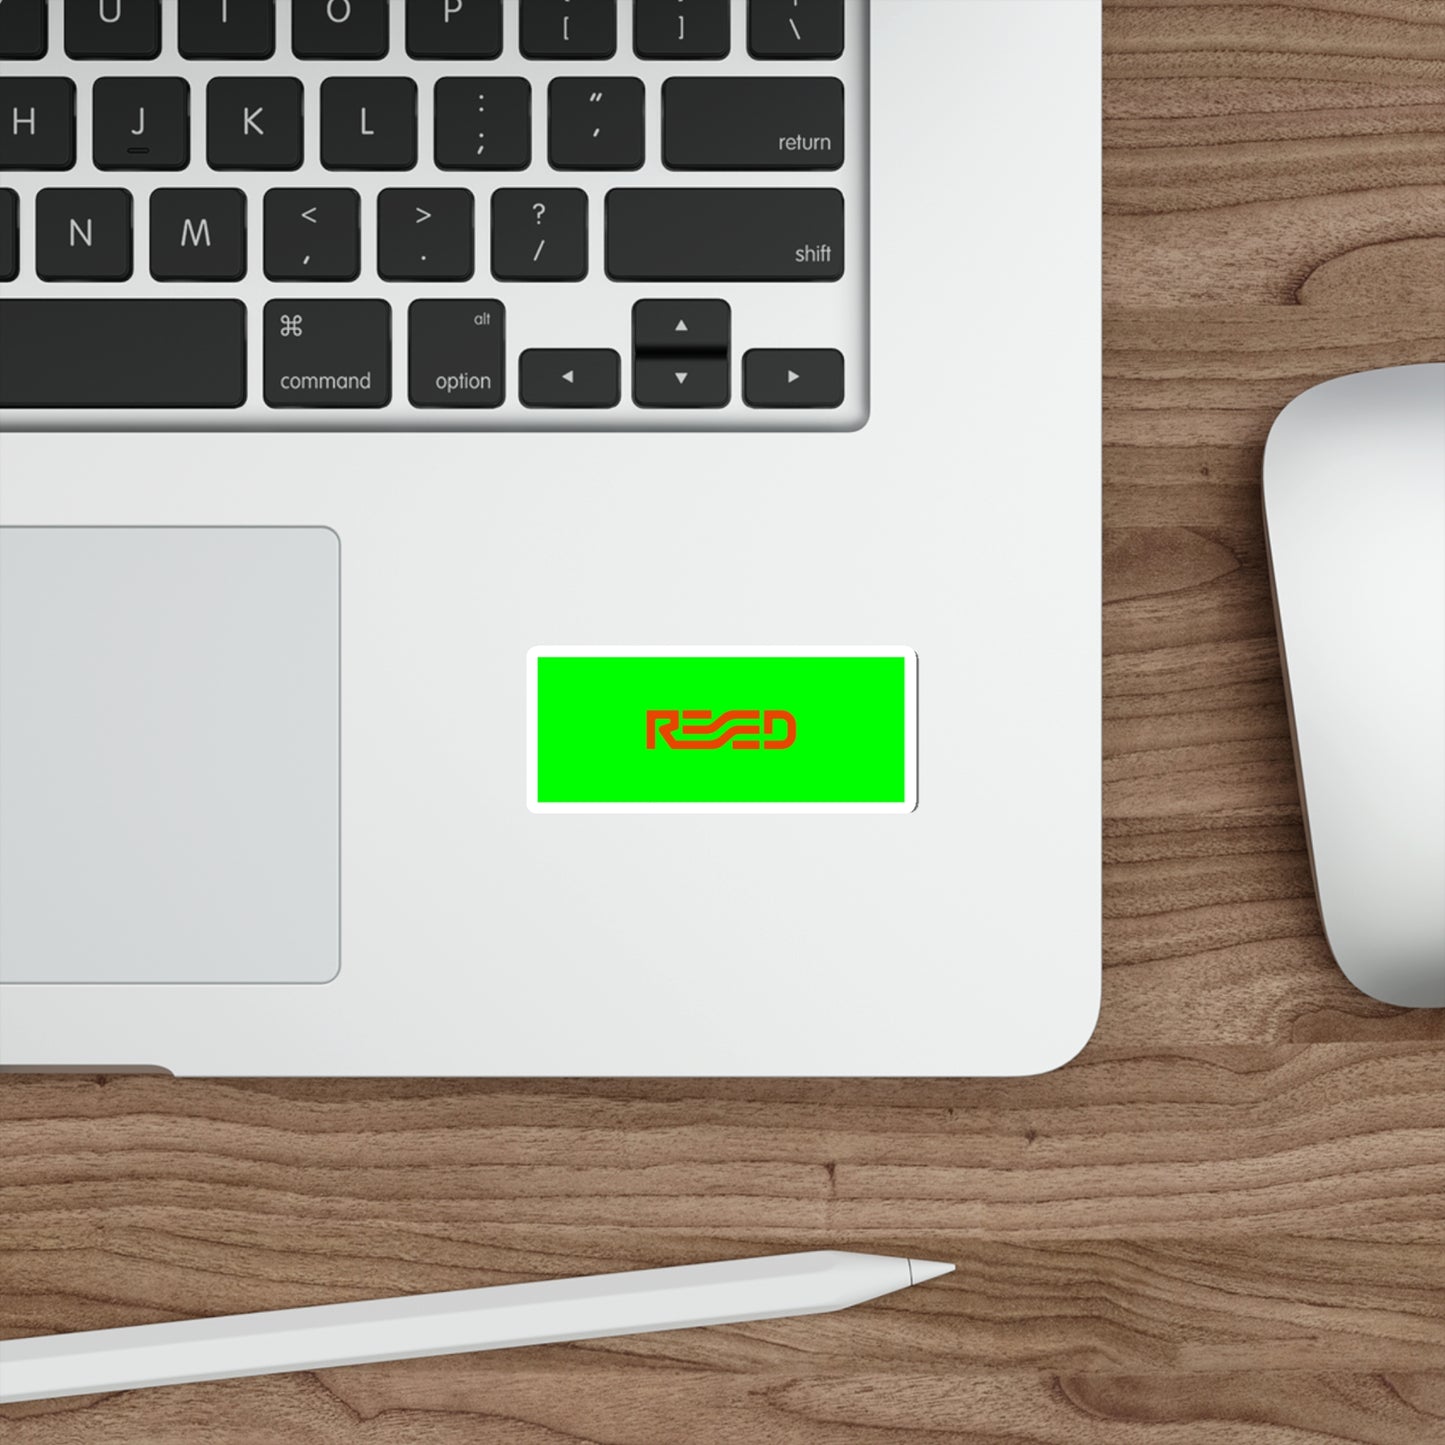 REED LOGO GREEN/RED STICKER - Never Stop Chasing